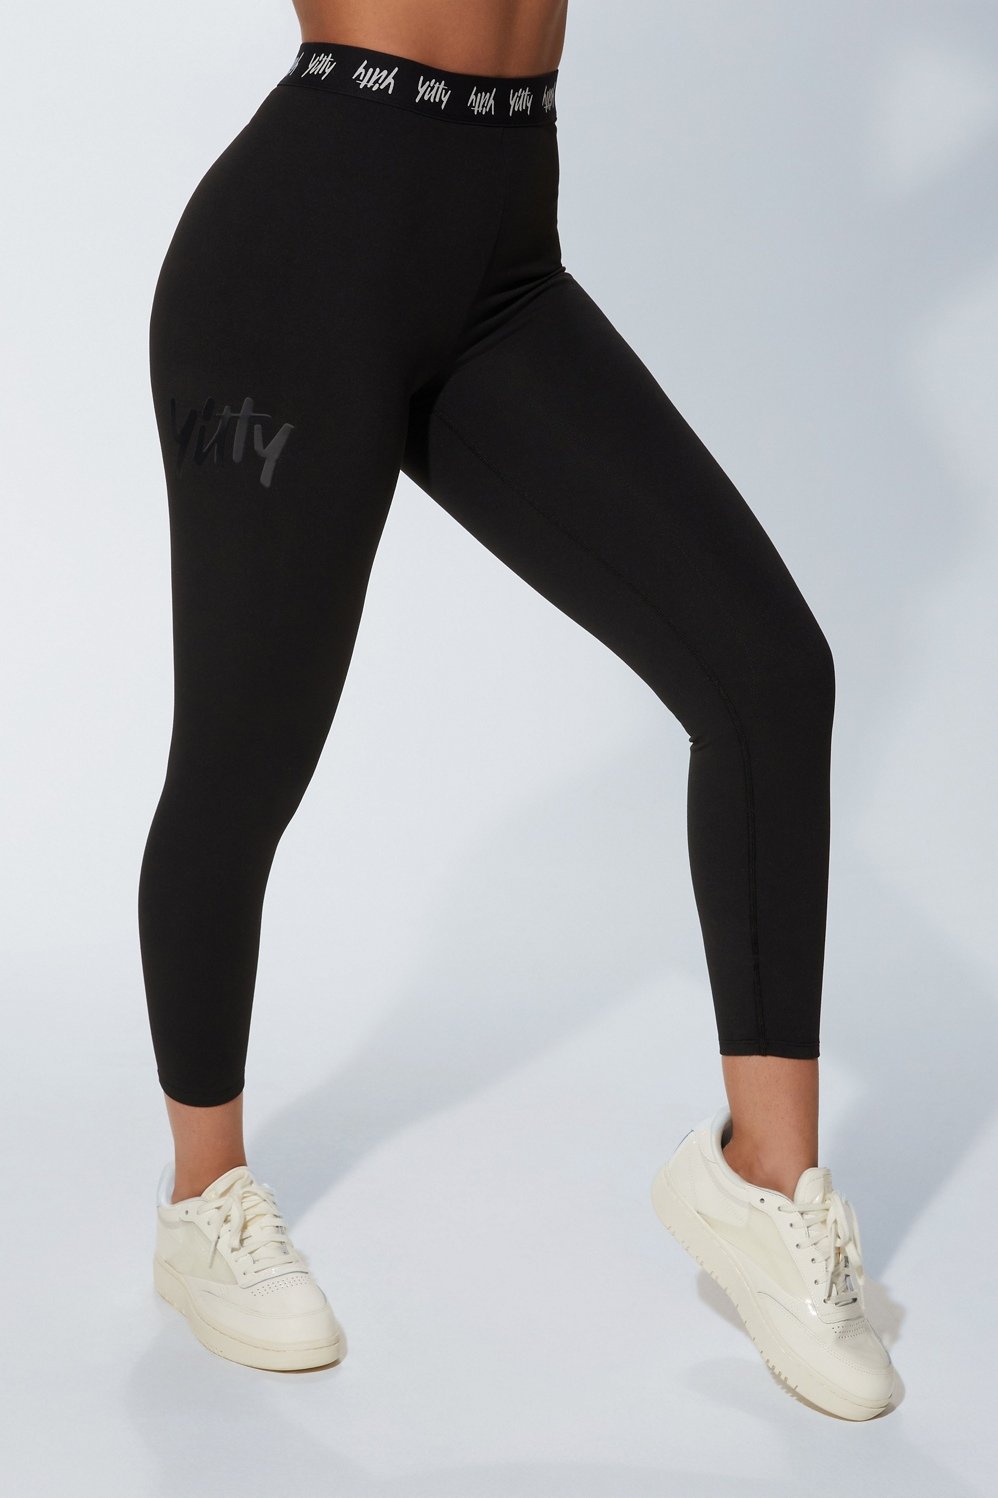 Fabletics - My Fabletics leggings fit like they were created specifically  for my body 😍 – Lindsay D, Washington, DC